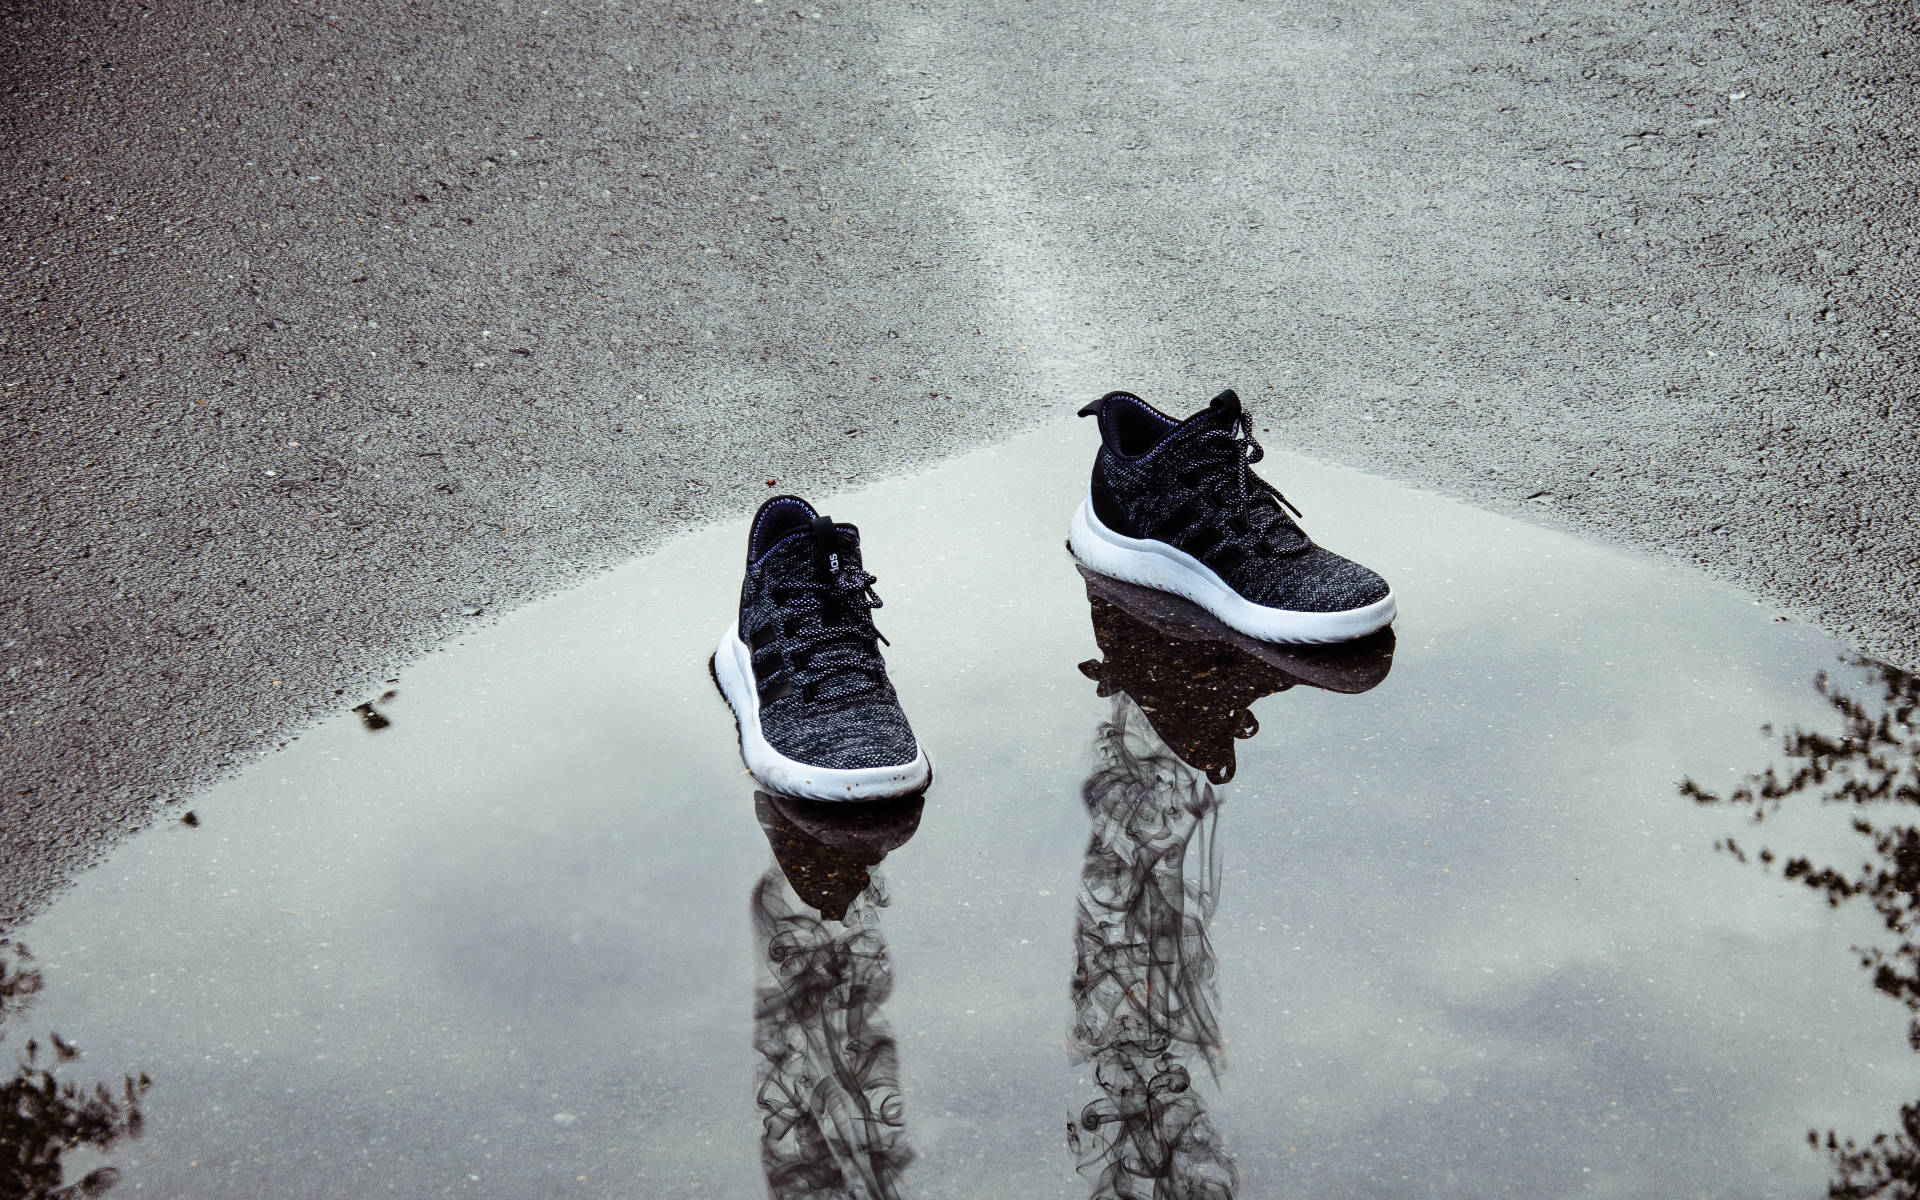 Cool Shoe In Puddle Background